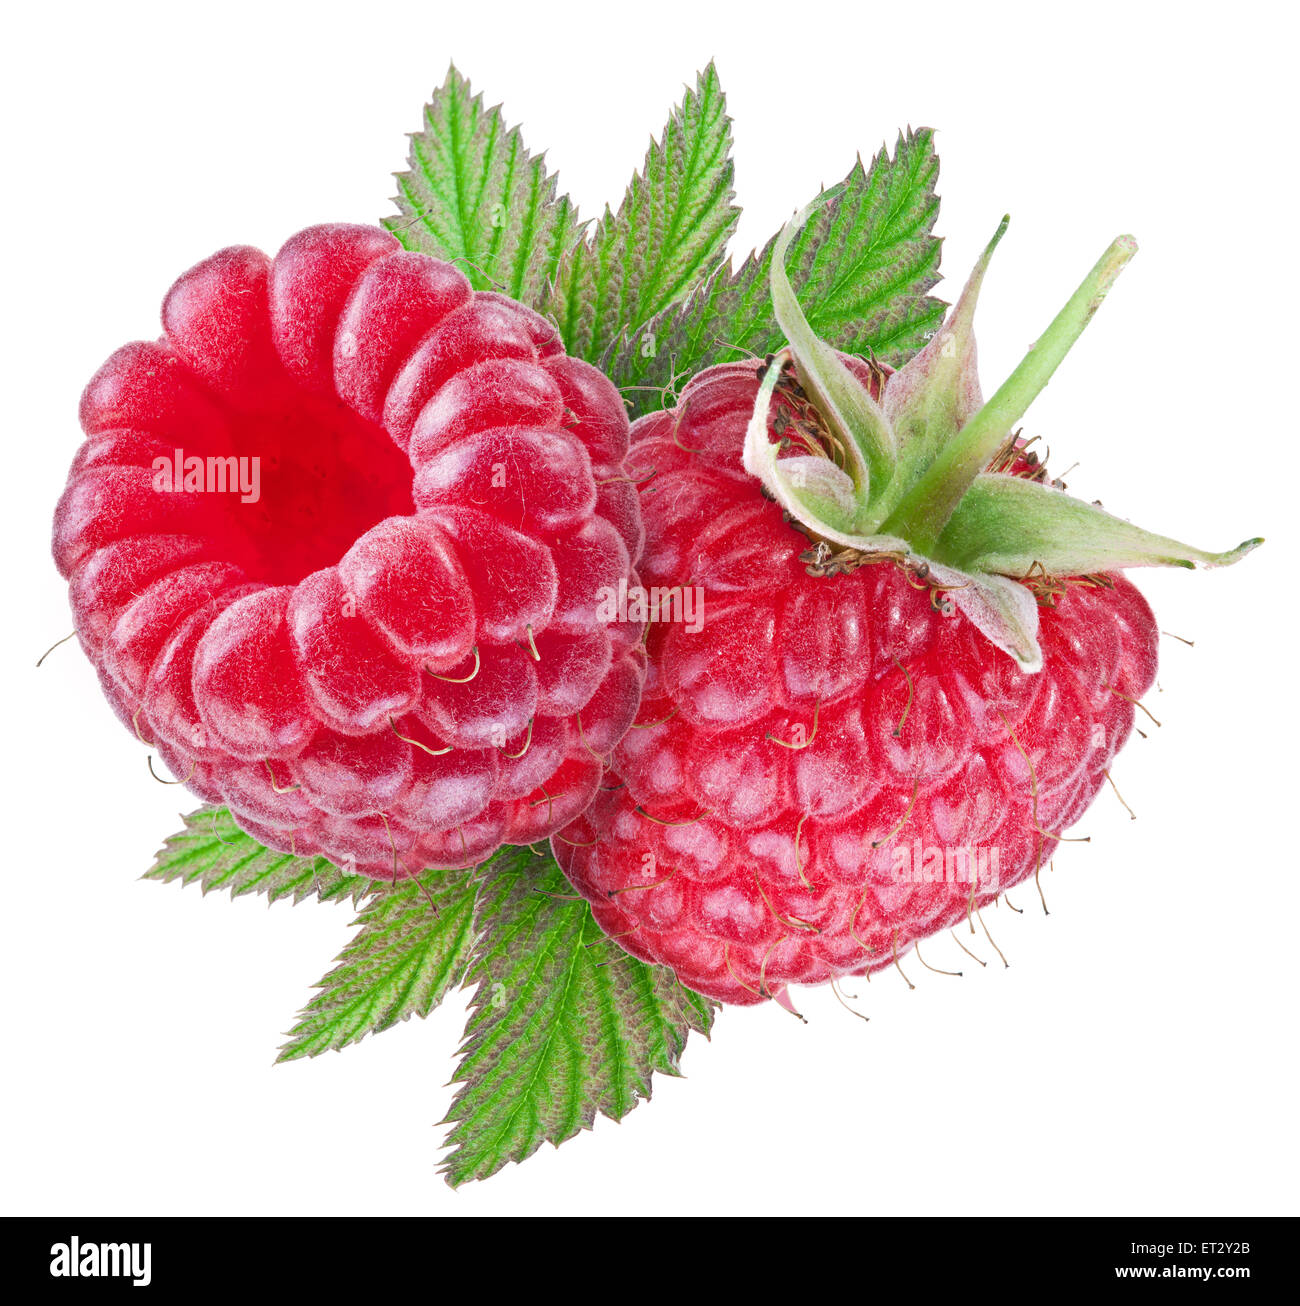 Raspberries with leaves. File contains clipping paths. Stock Photo